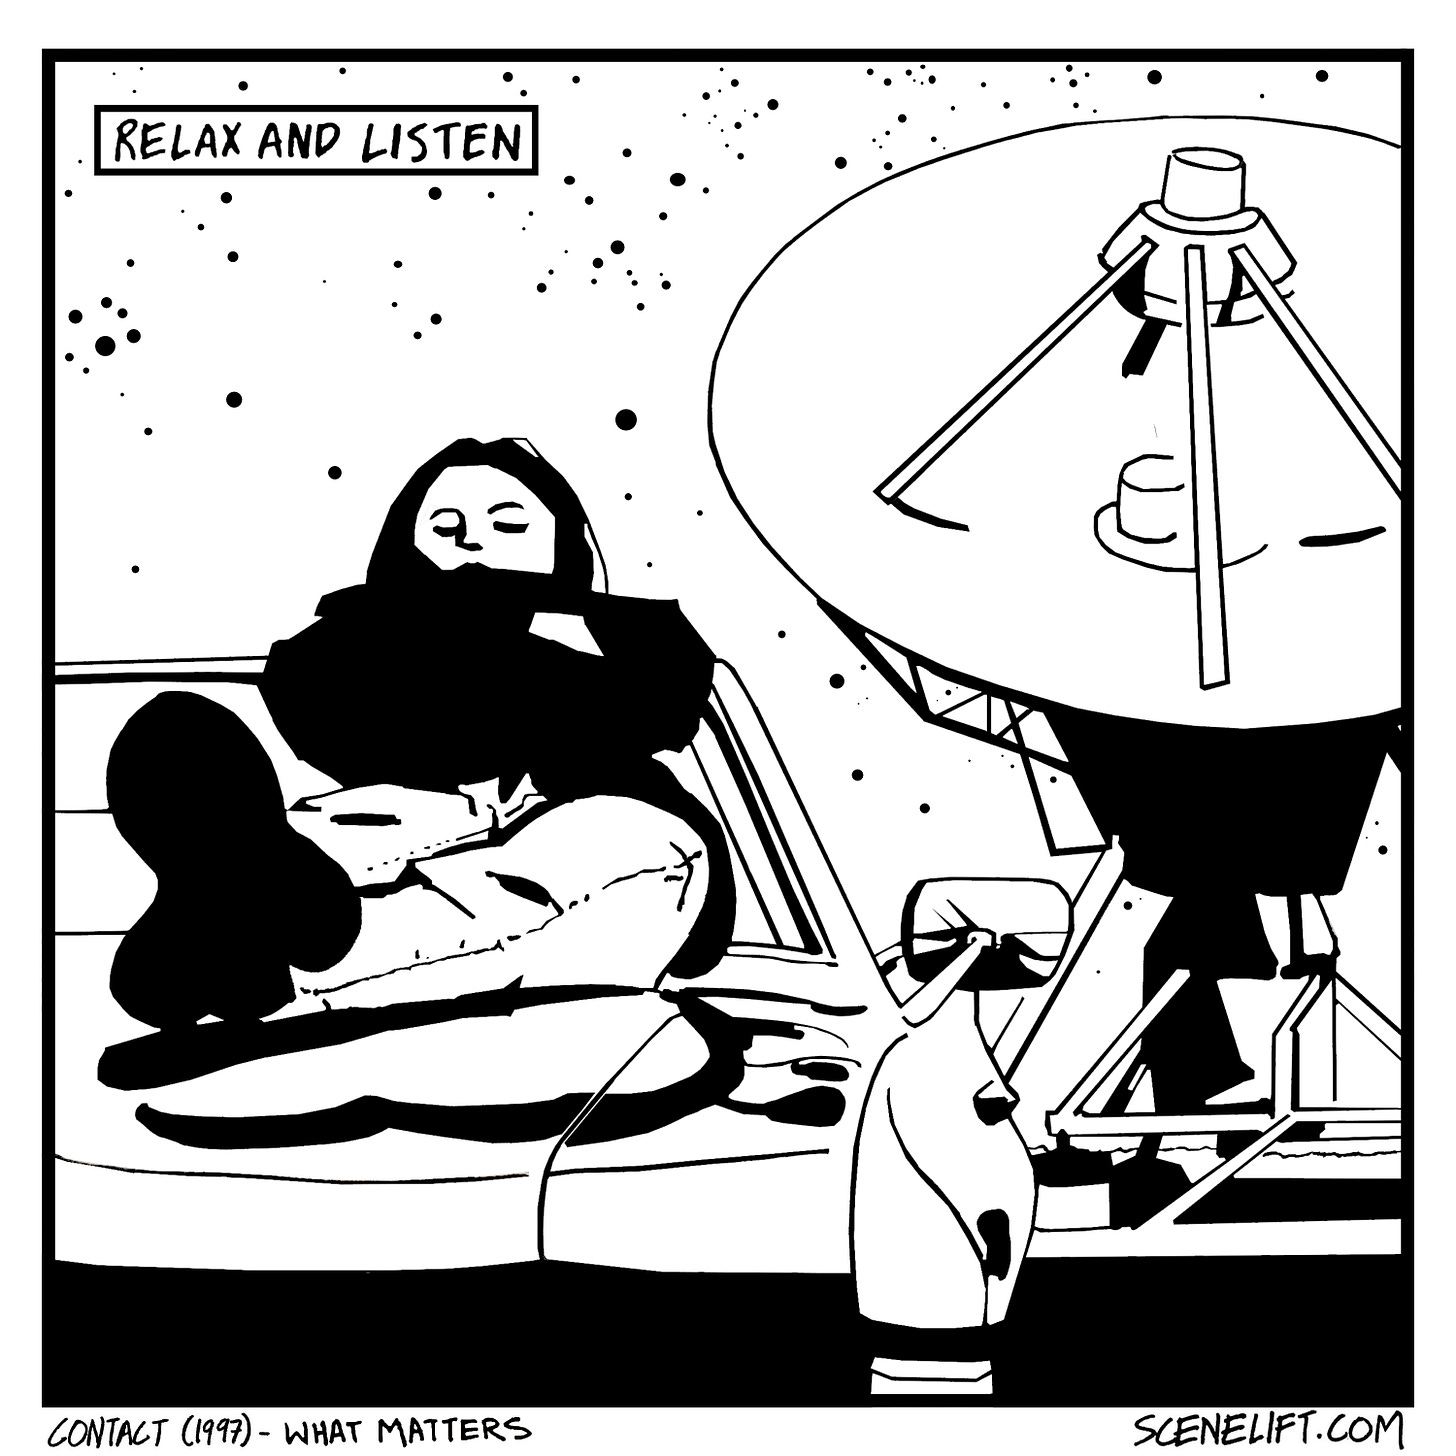 Fan art comic of Ellie resting on her car near the telescopes at the VLA in New Mexico in the movie Contact